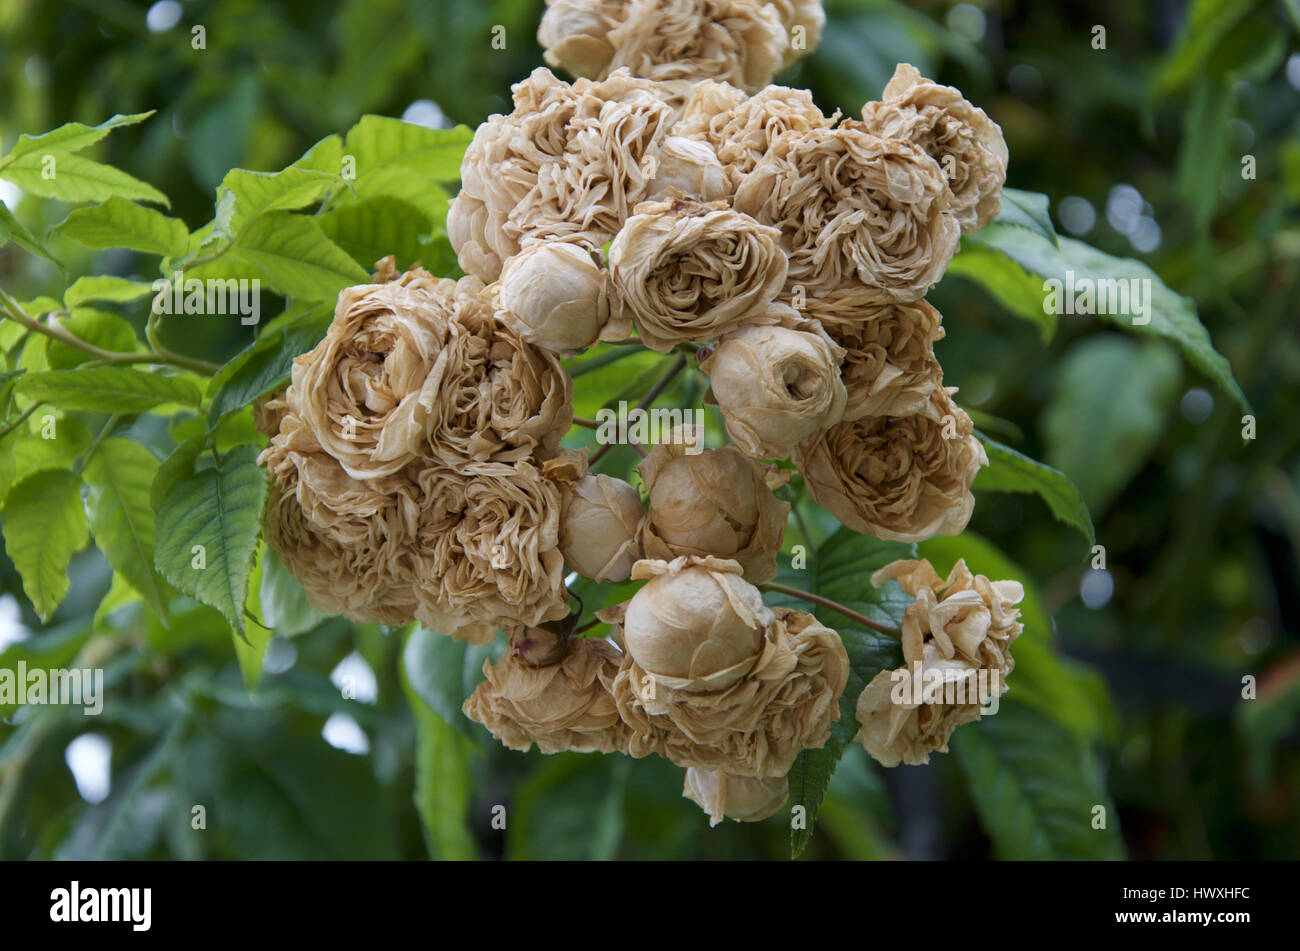 Dead rose flowers caused by bad weather. Stock Photo